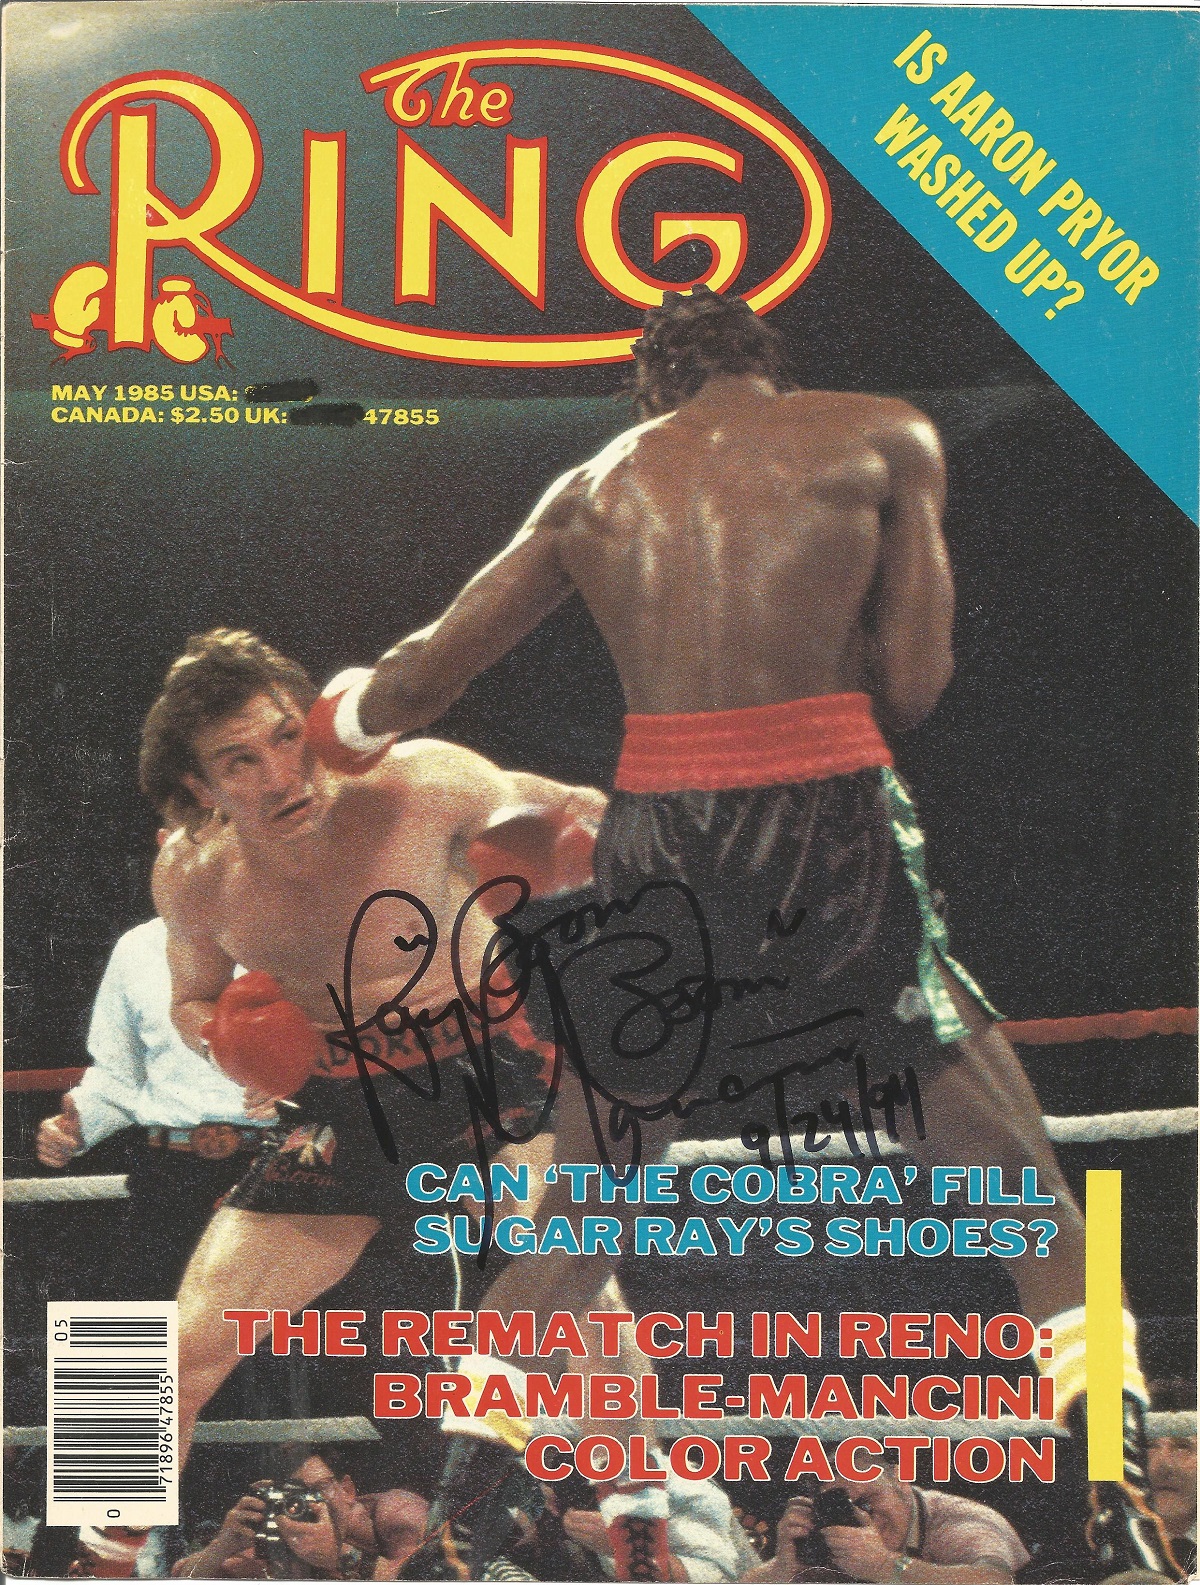 Boxing Ring Magazine cover 1985 Ray Boom Boom Mancini. Good condition. All autographs come with a